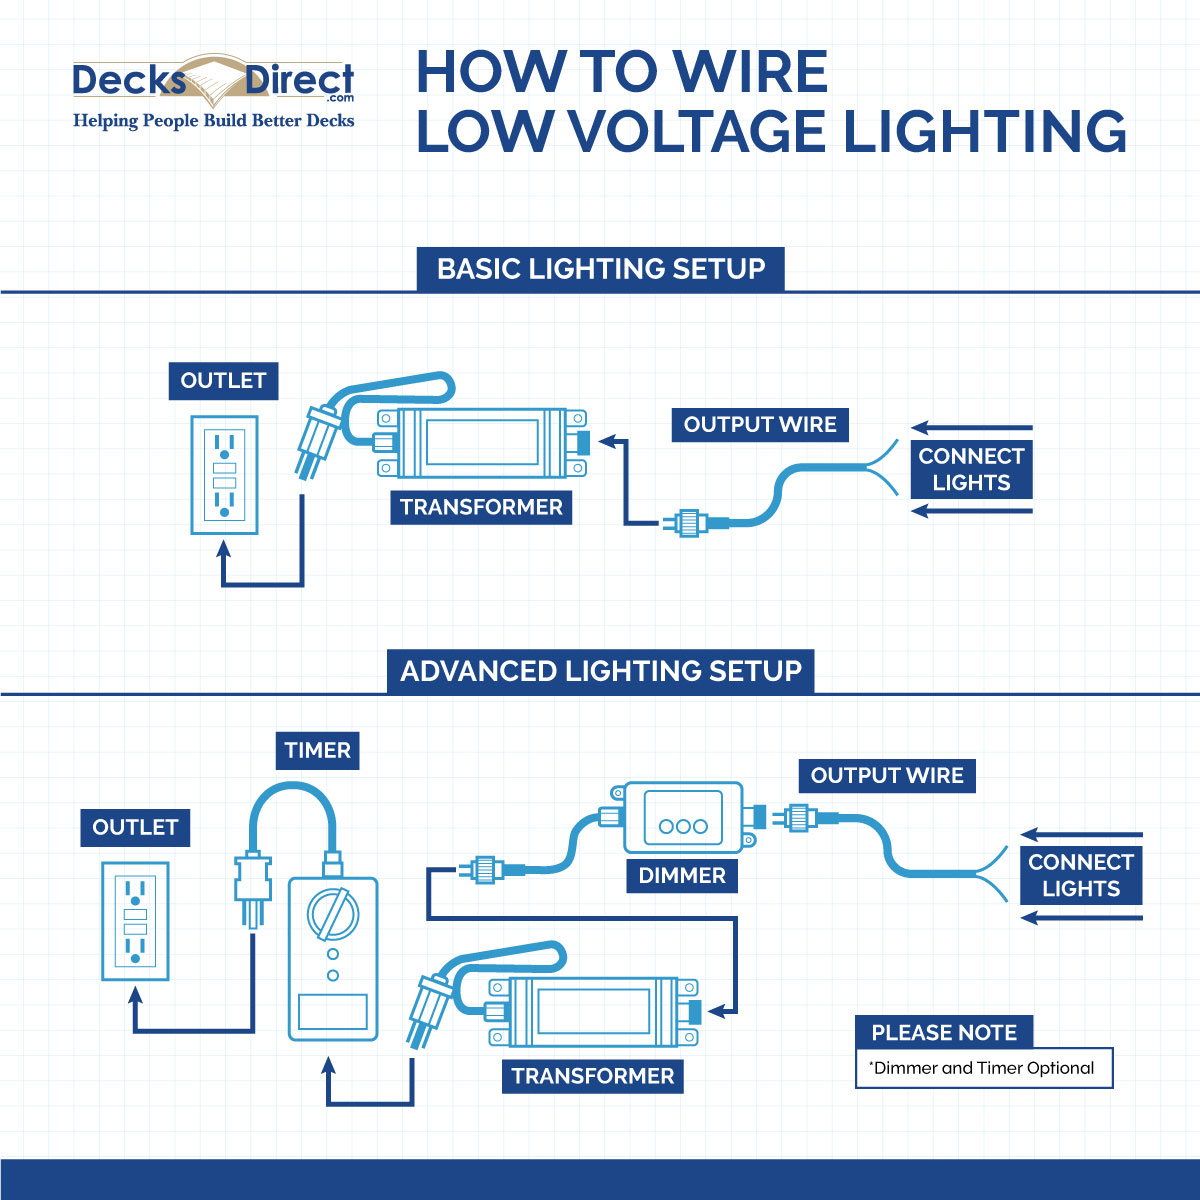 Diagram on how to wire low-voltage outdoor lighting